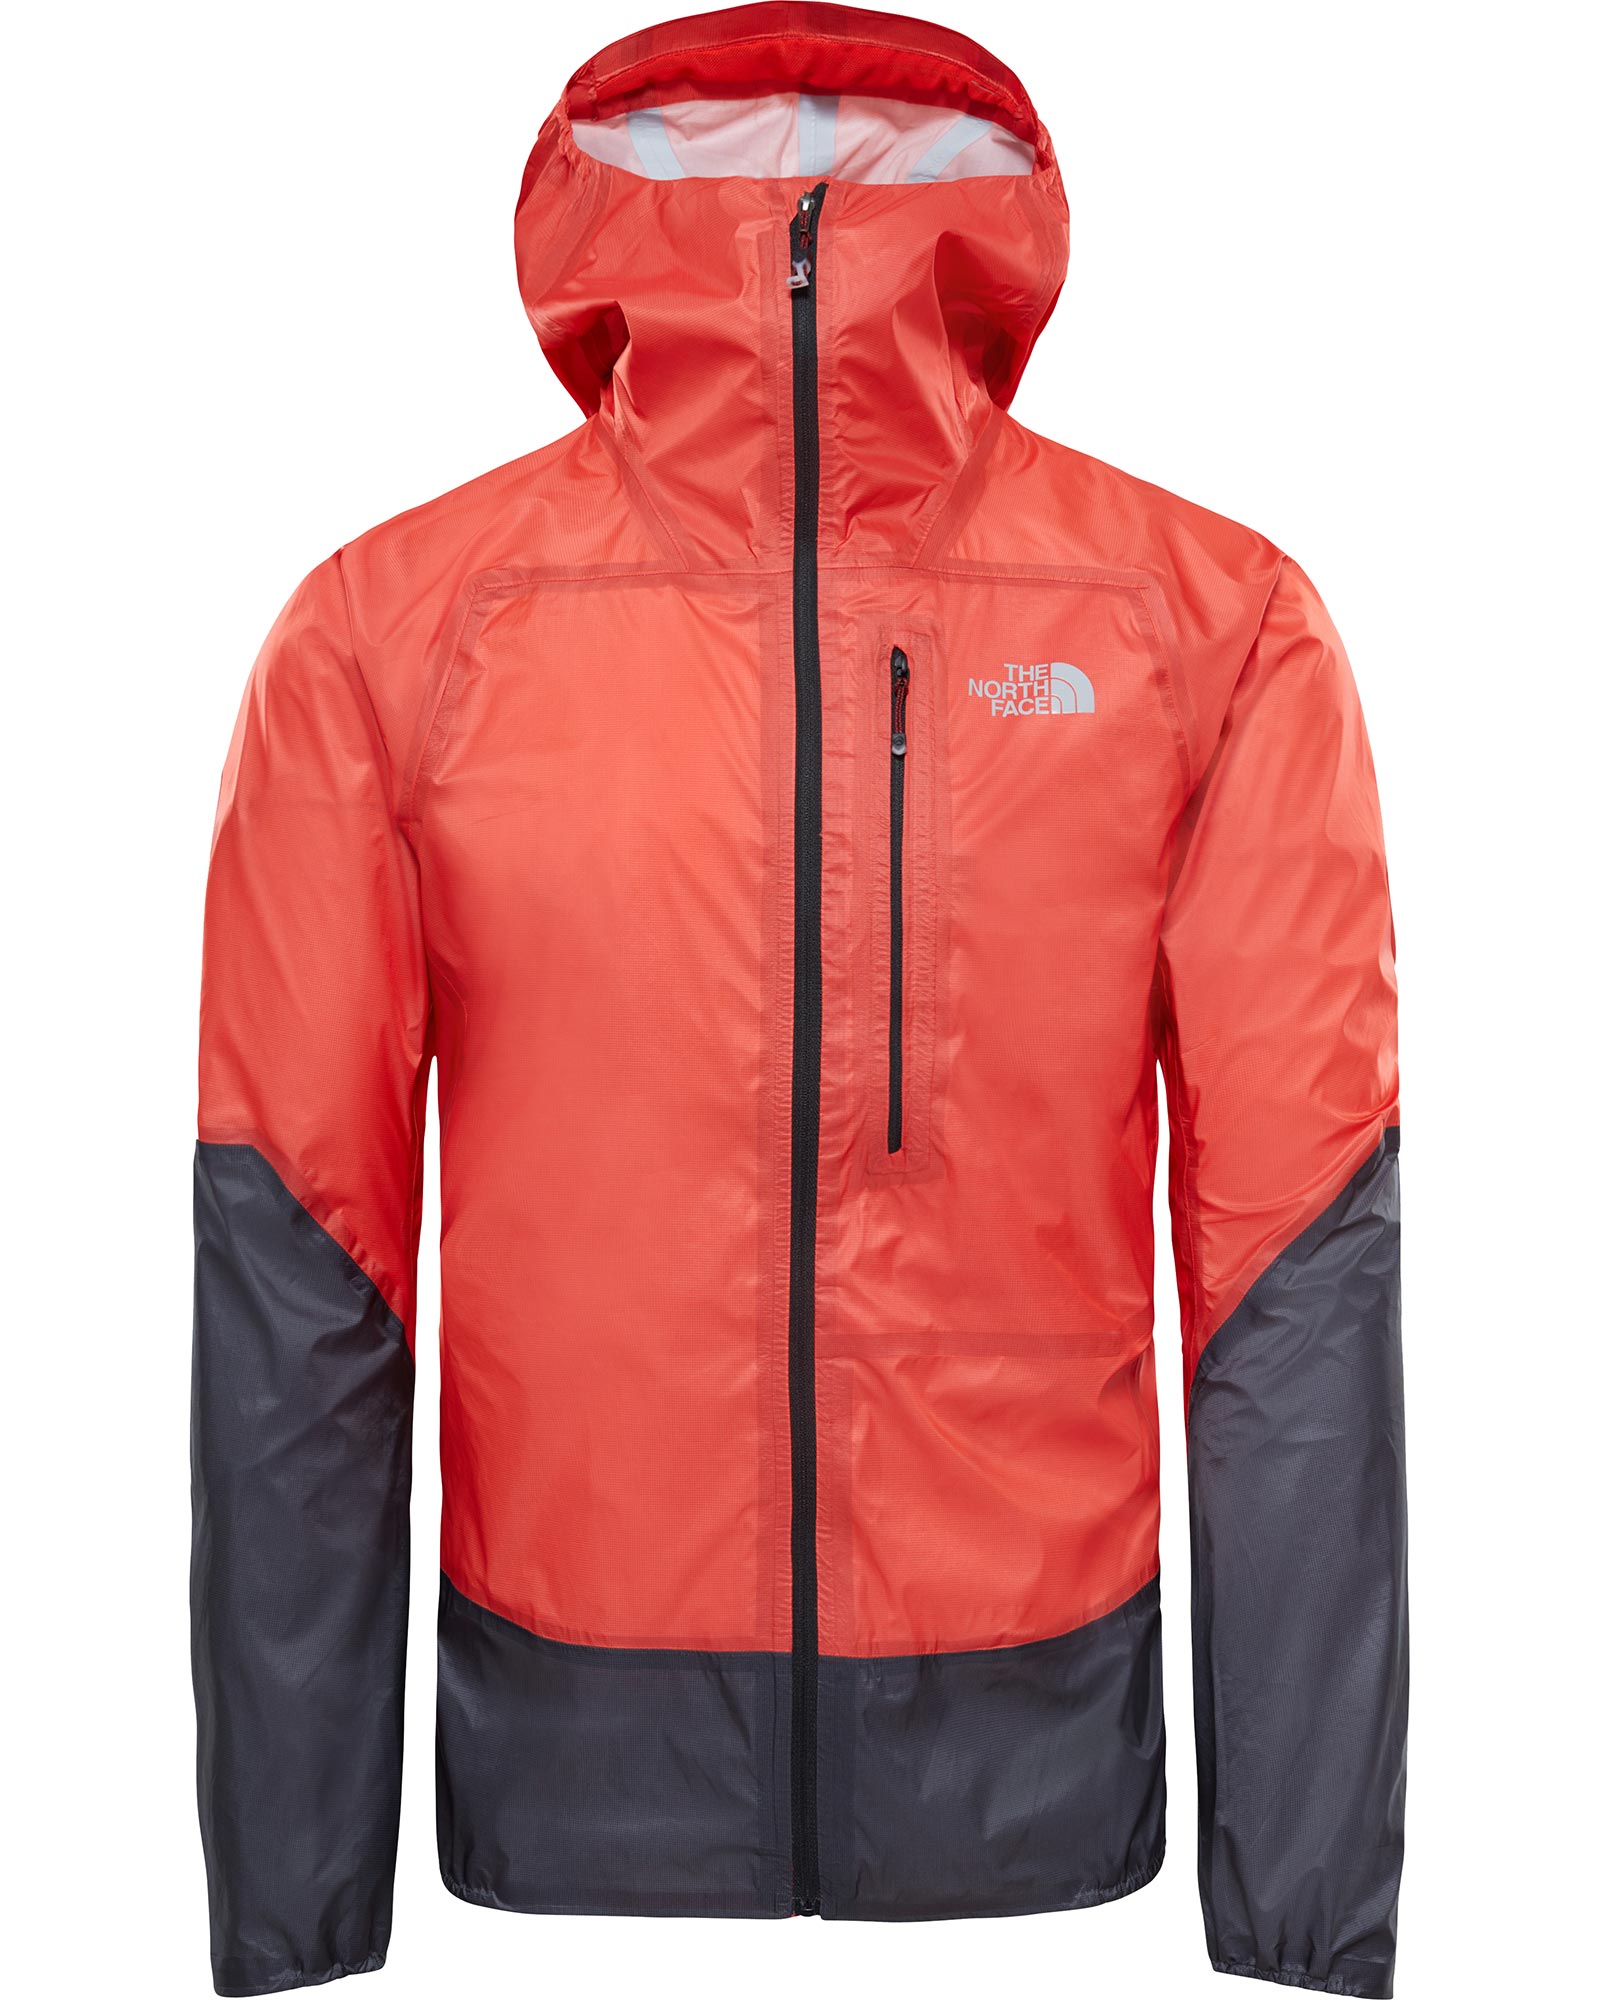 The North Face Summit Series L5 Ultralight DryVent Men’s Storm Jacket - Fiery Red/Black XL